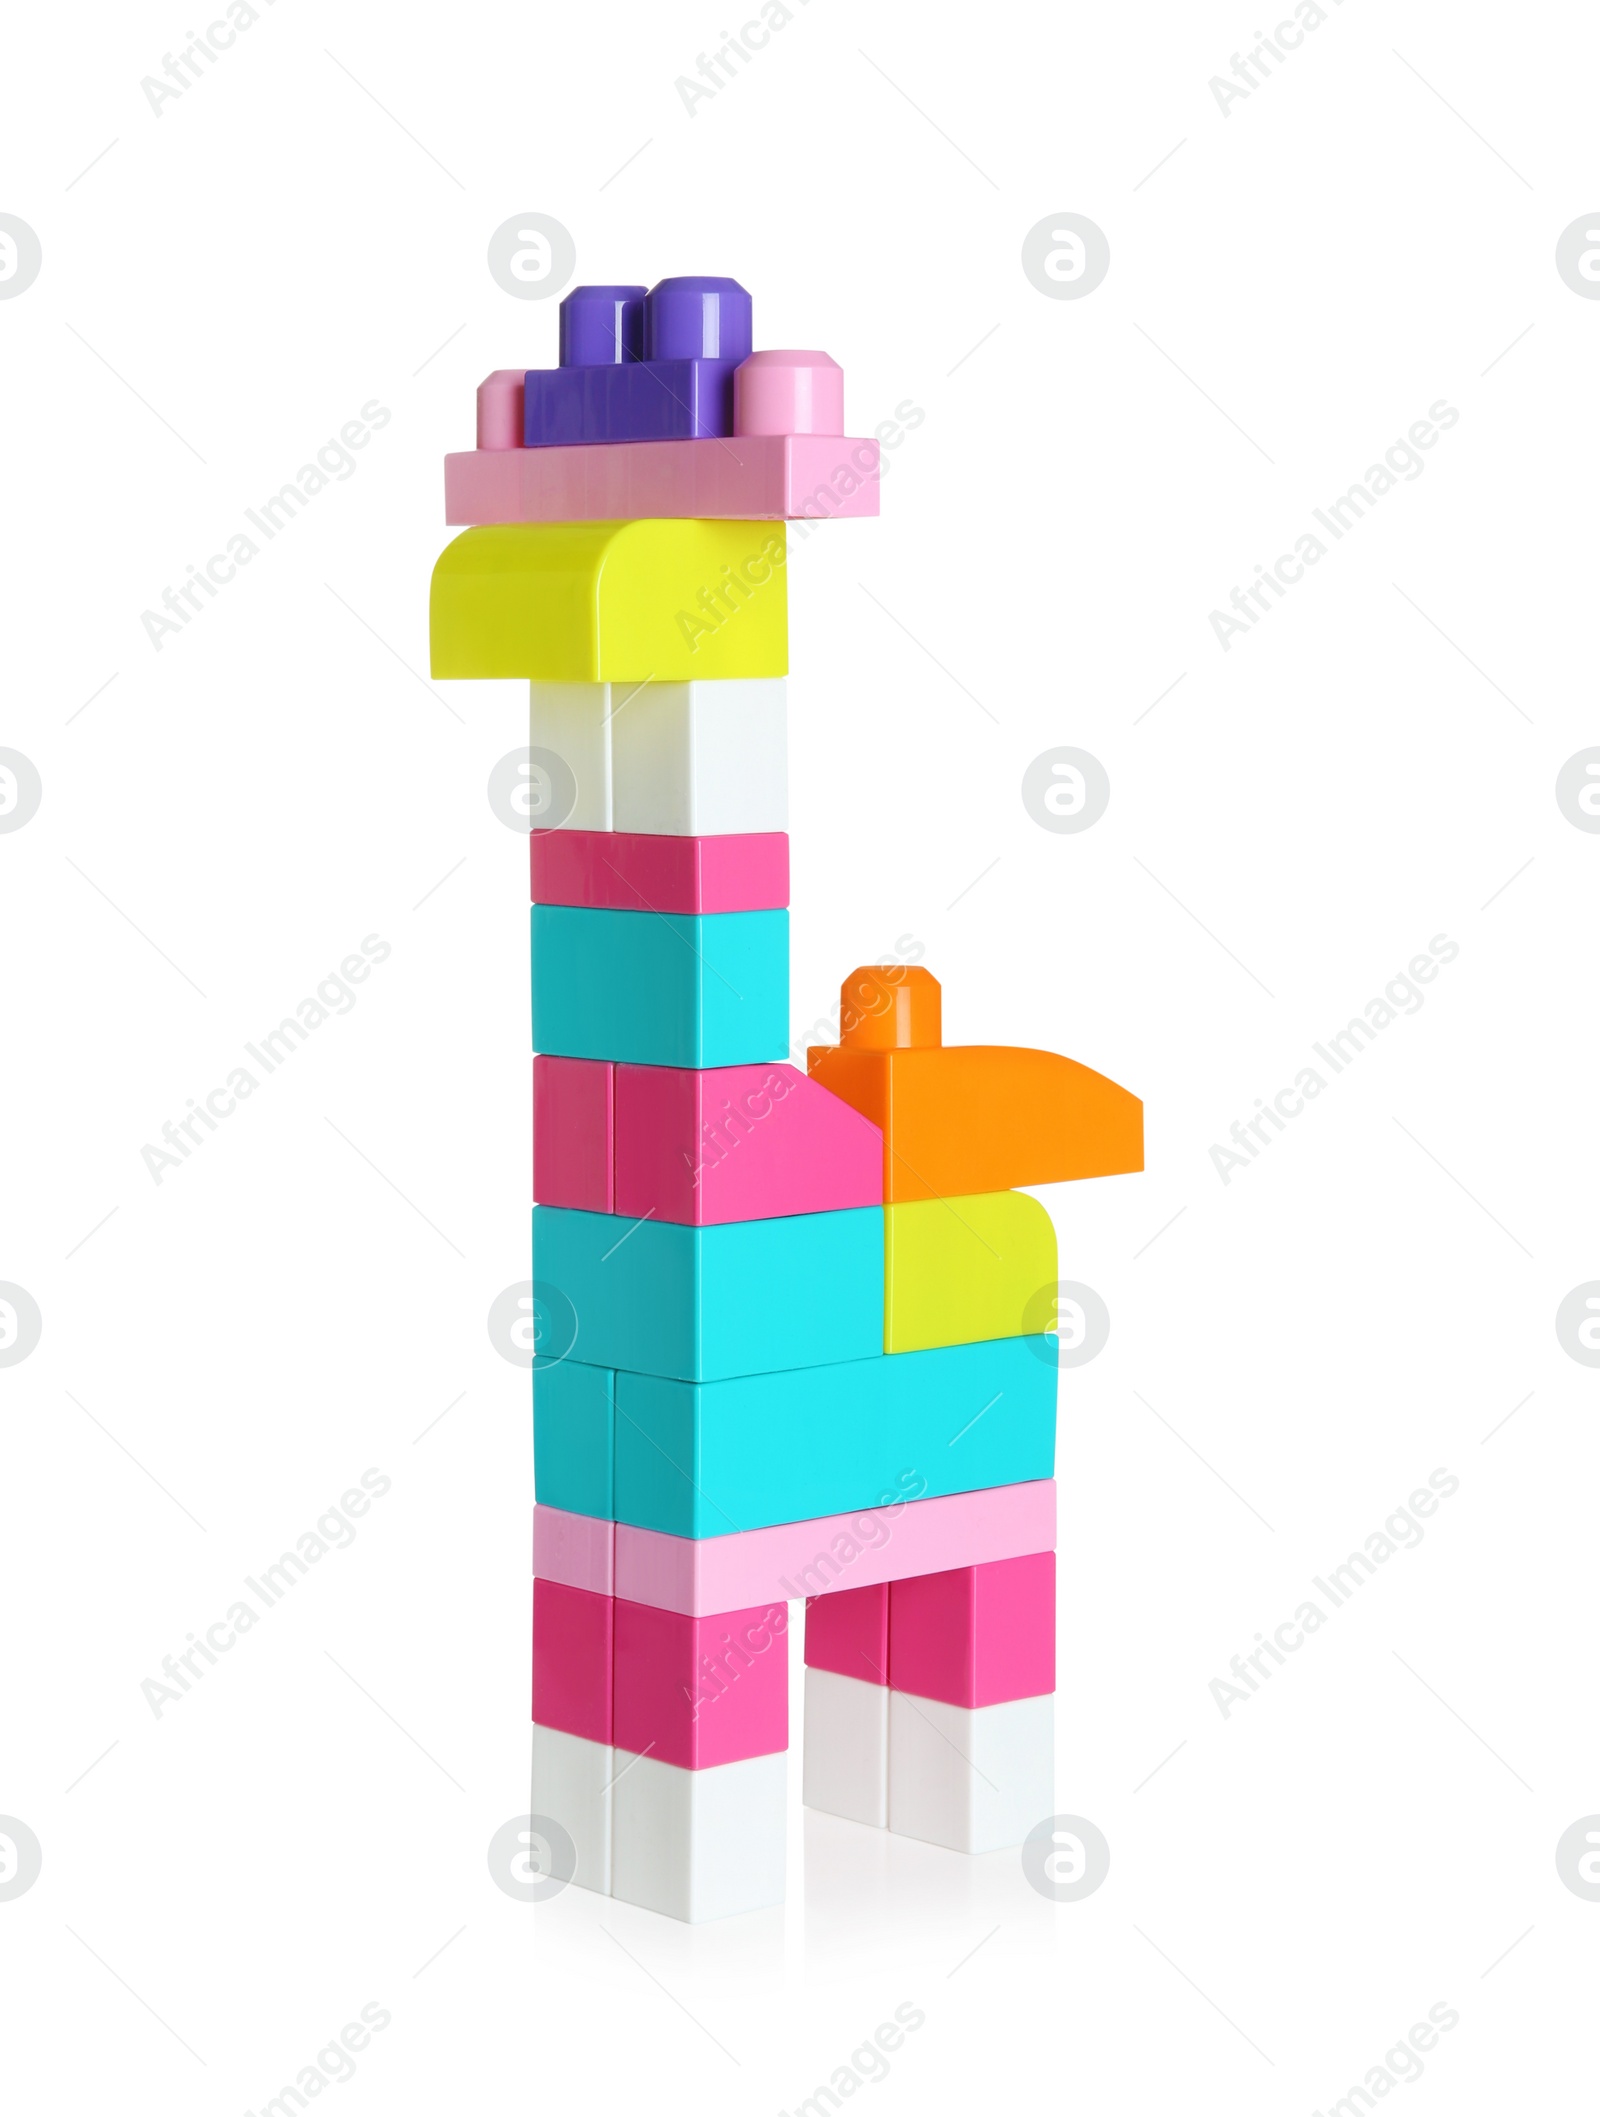 Photo of Animal made of colorful plastic blocks on white background